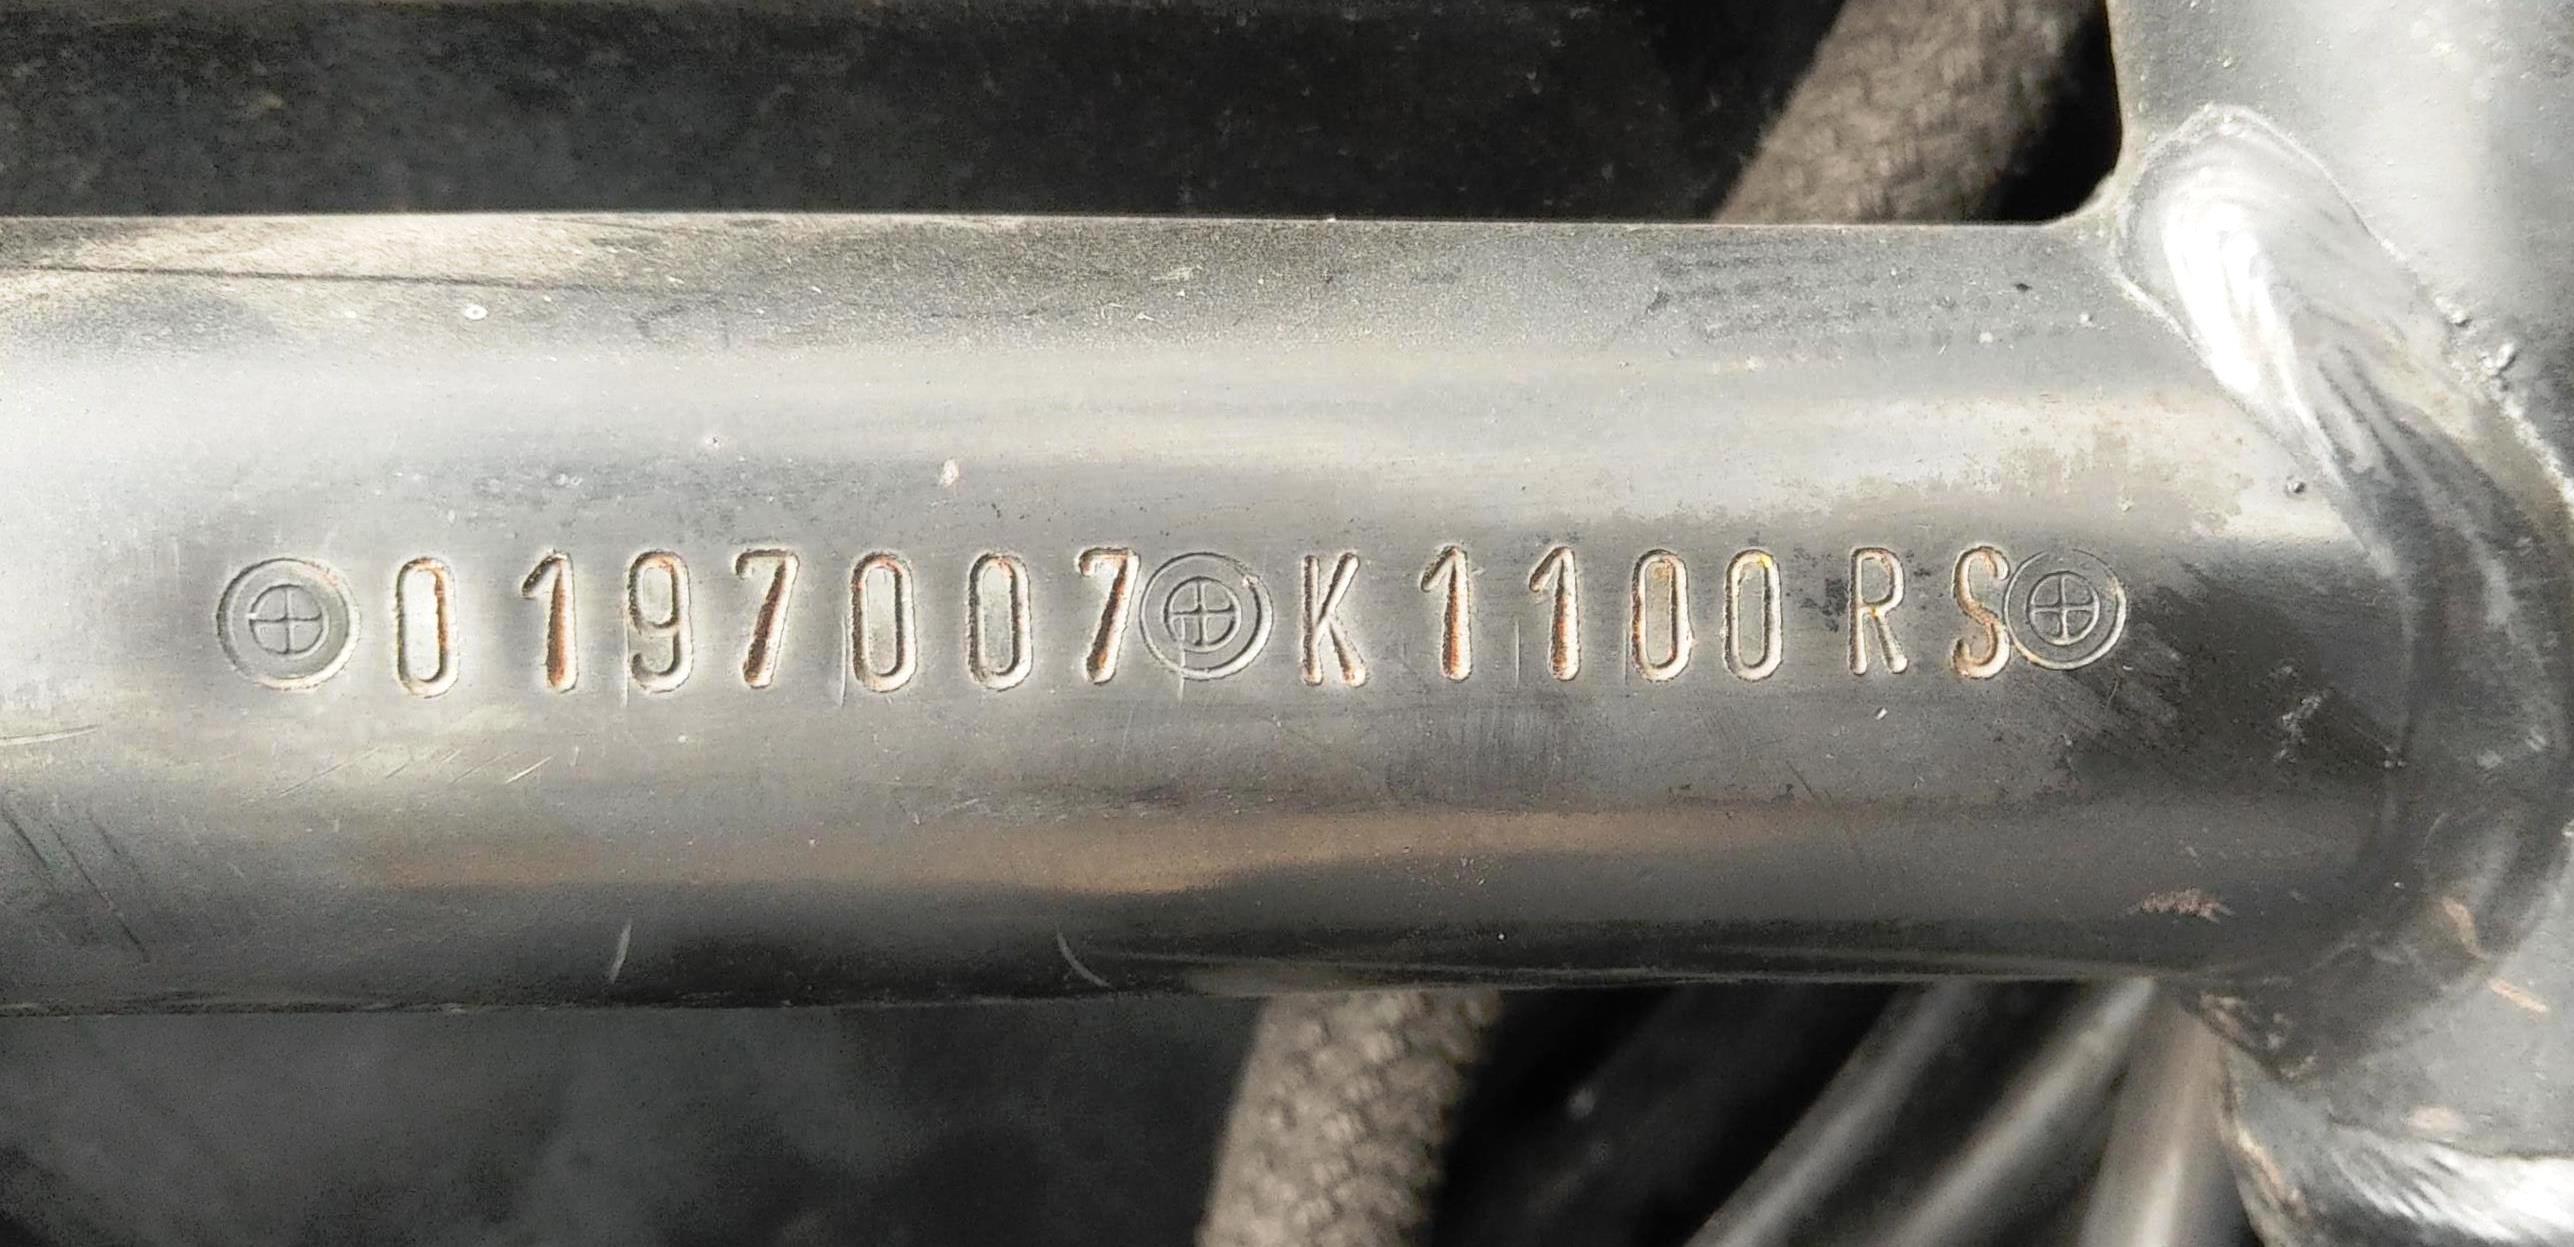 How to figure out the exact VIN number? K1100r11